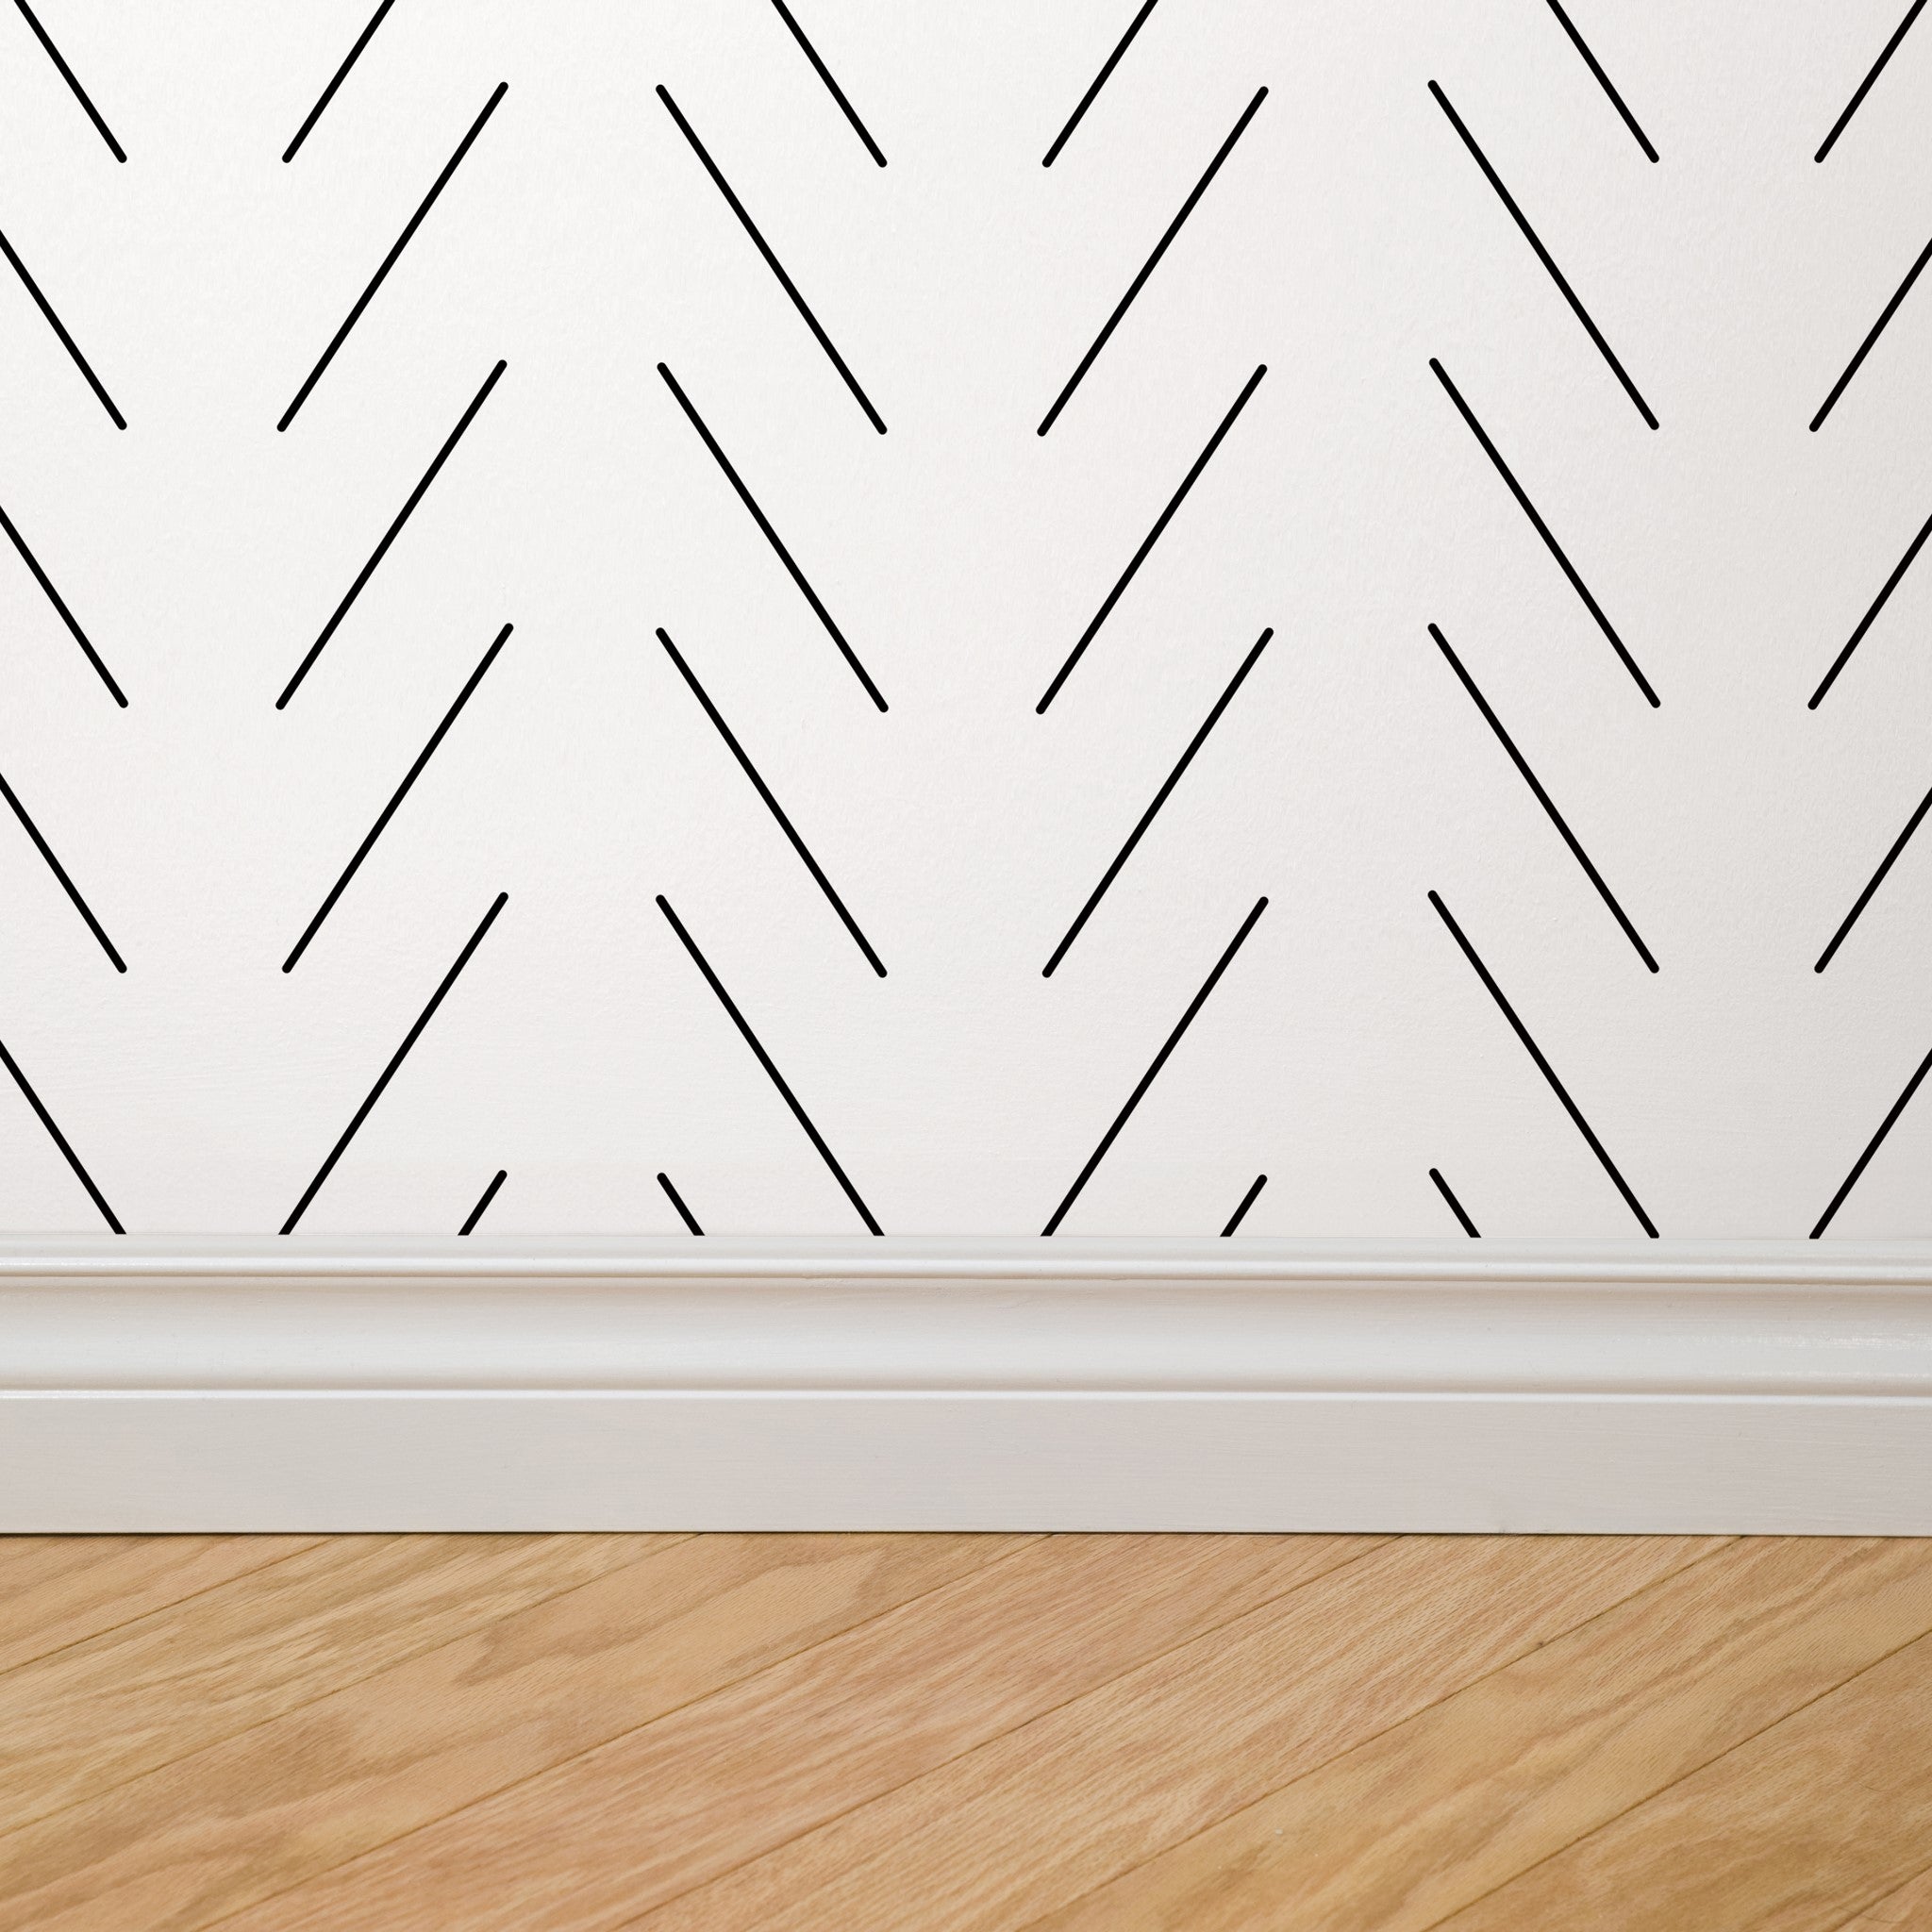 Oliver Wallpaper by Wall Blush on bedroom wall with abstract lines, modern decor focus.